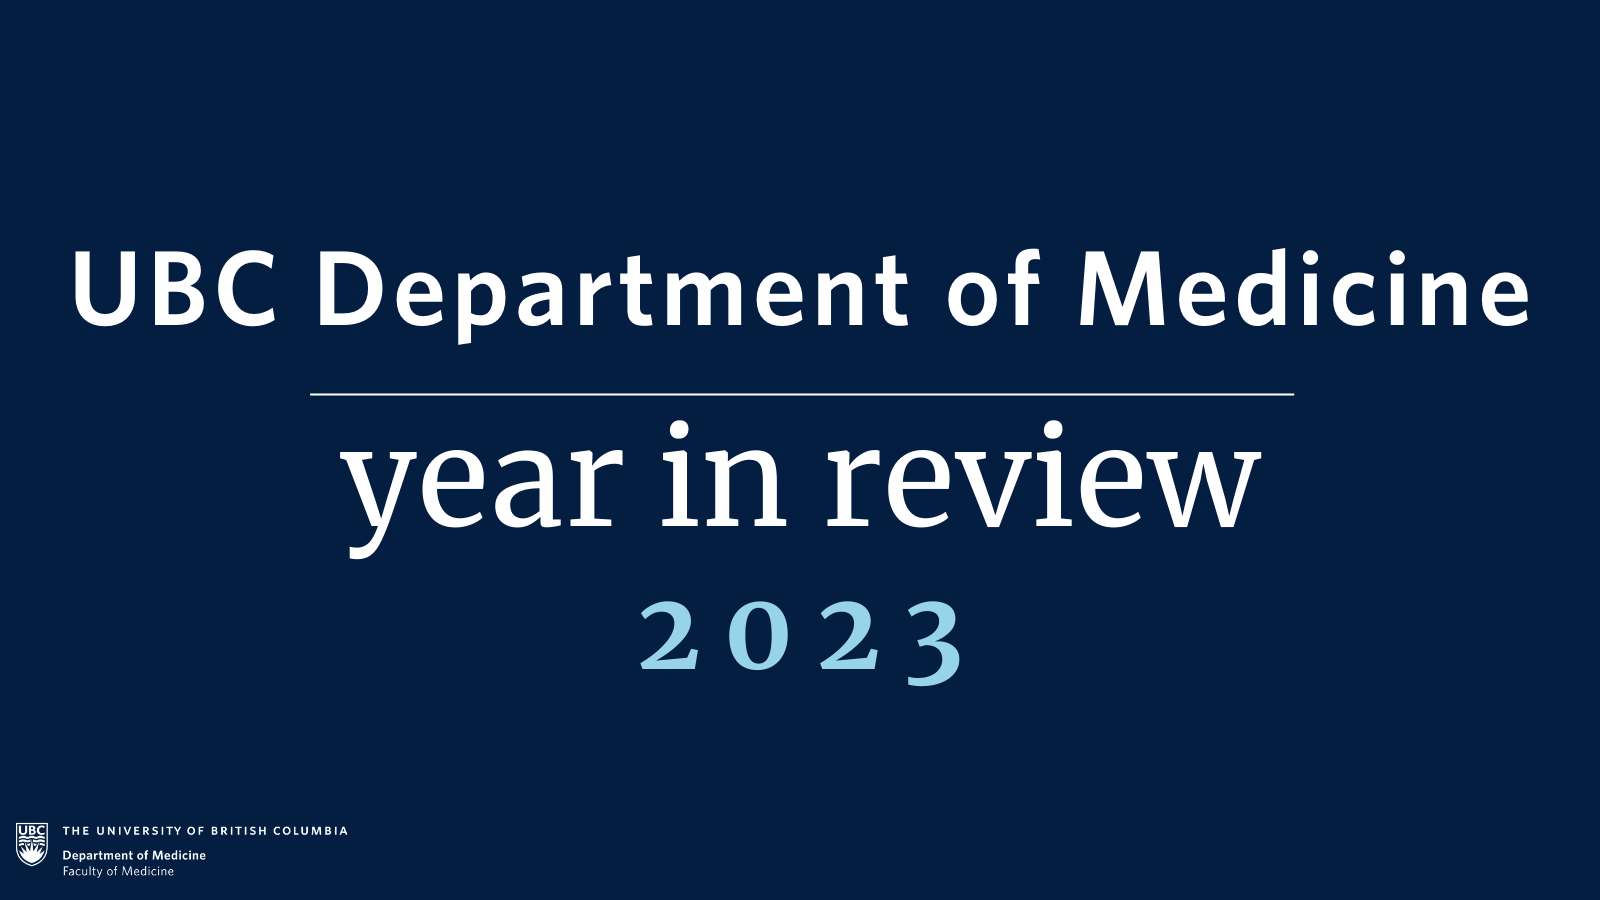 UBC Department of Medicine Year in Review: 2023